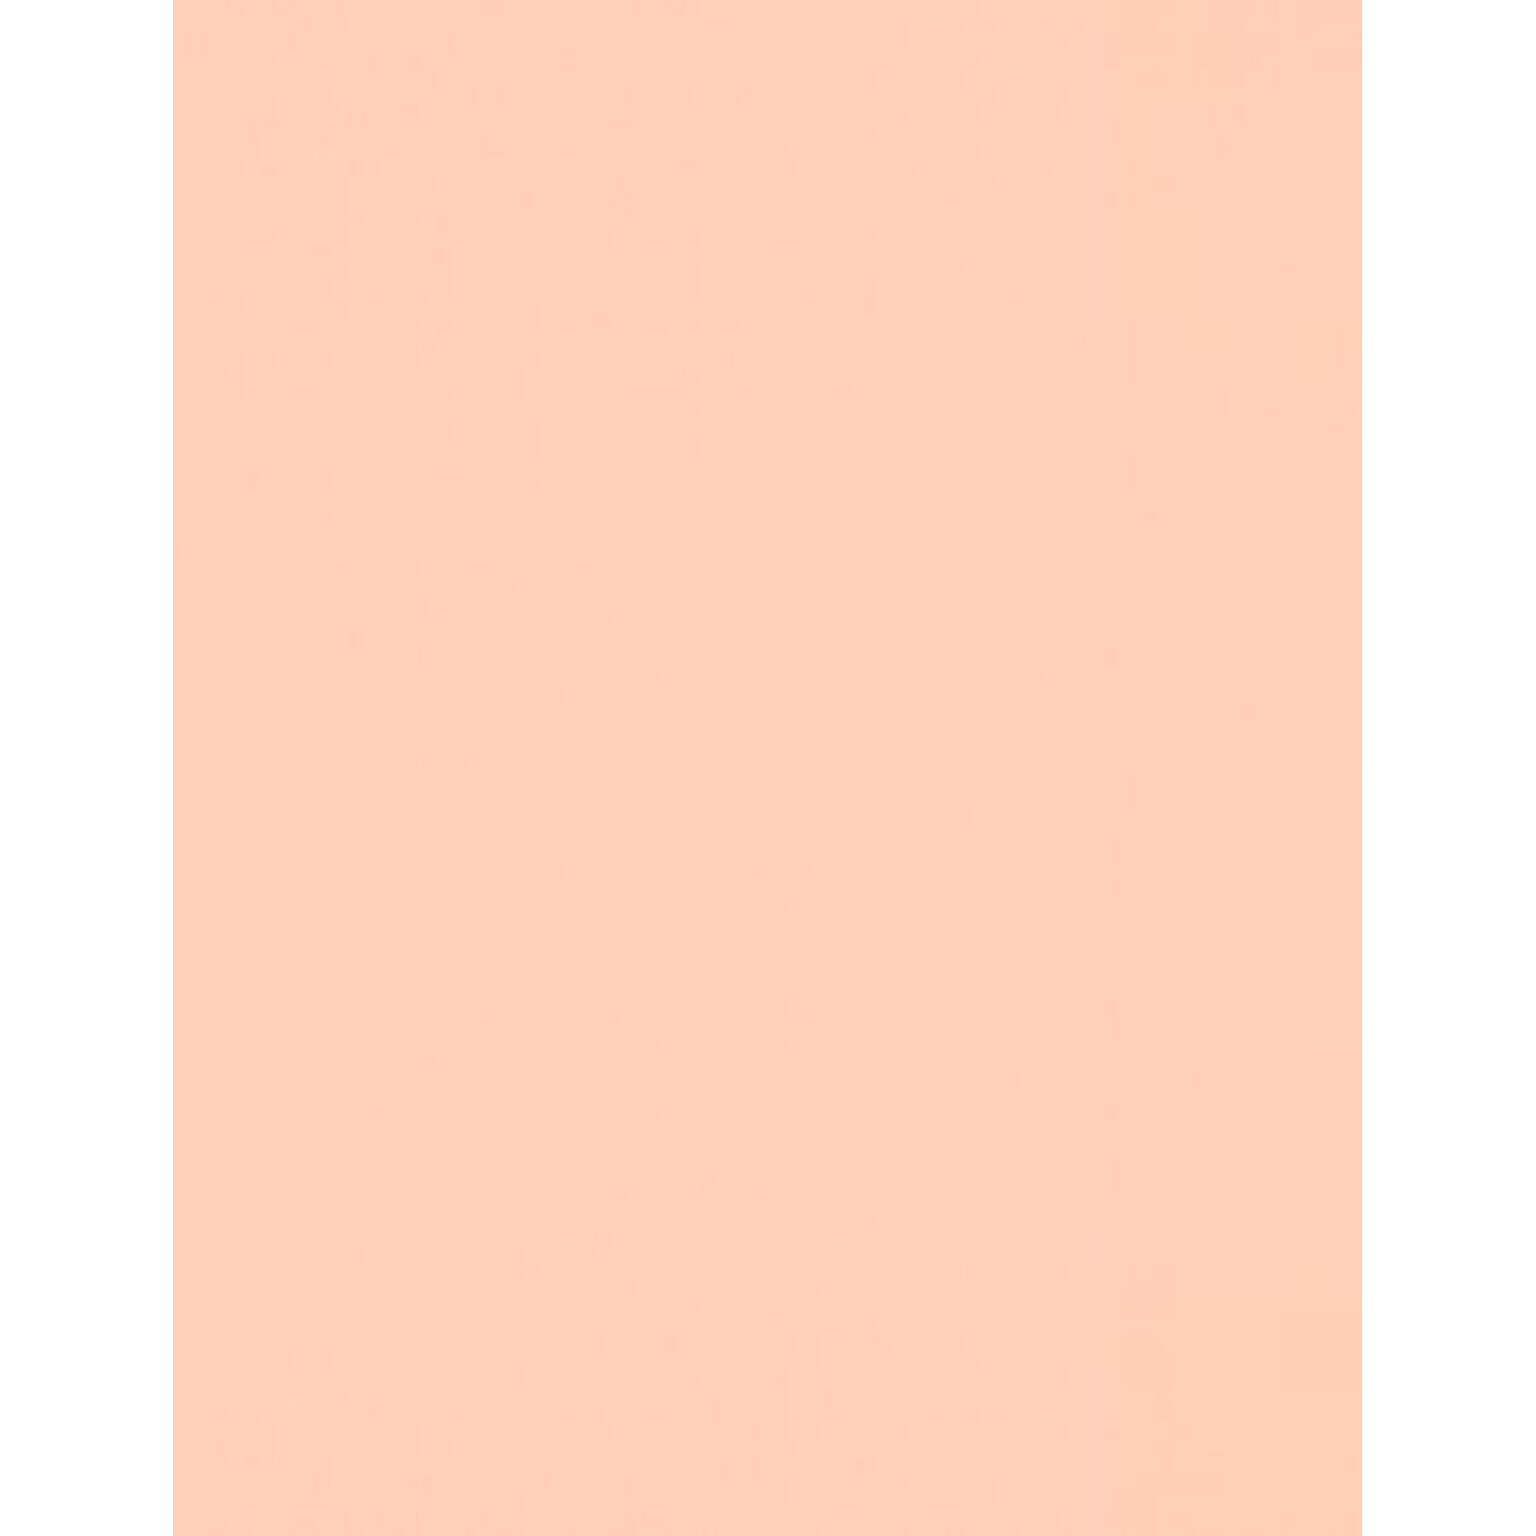 LUX Colored Paper, 32 lbs., 8.5 x 11, Blush, 50 Sheets/Pack (81211-P-114-50)